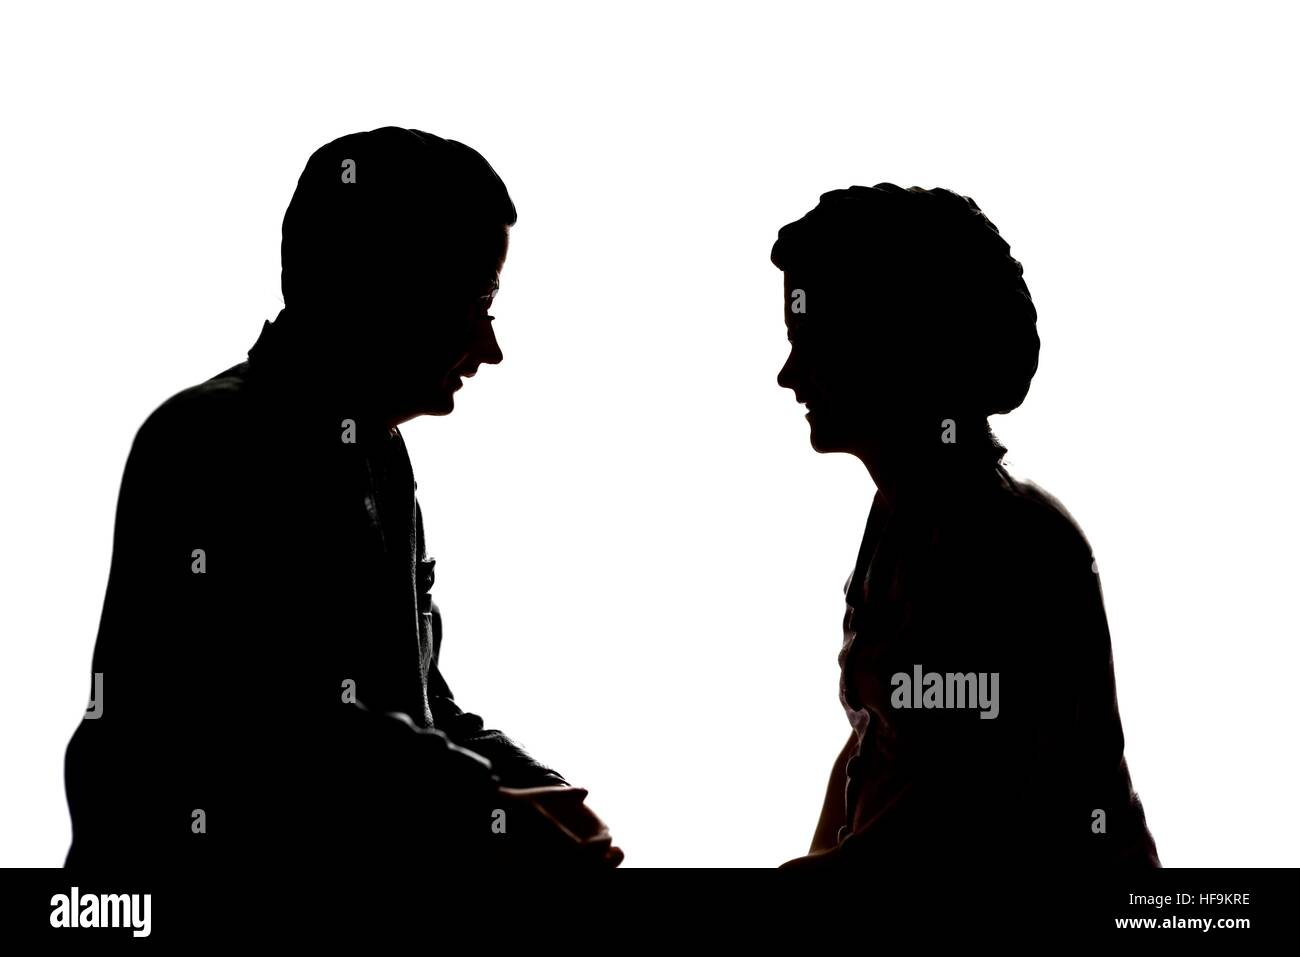 A silhouette of a senior elderly couple in conversation.model figurines. Stock Photo